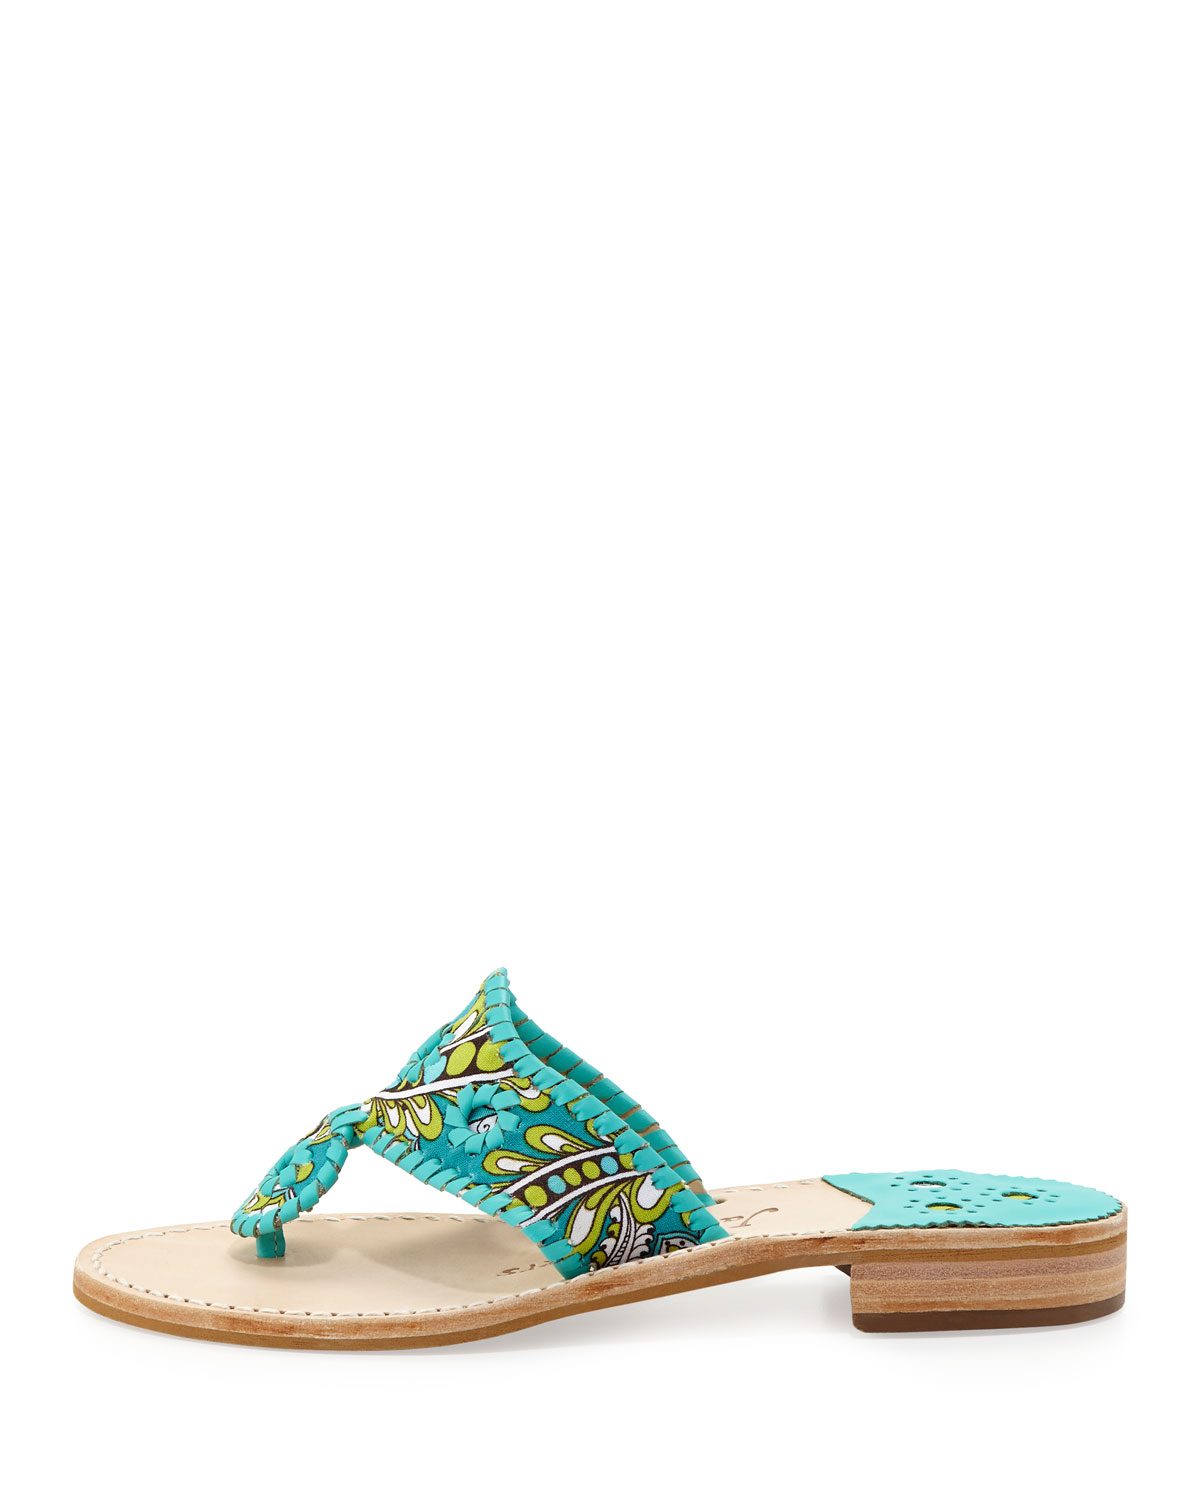 Jack Rogers Peacock Printed Whipstitch Sandal Turquoise in Blue (5) | Lyst